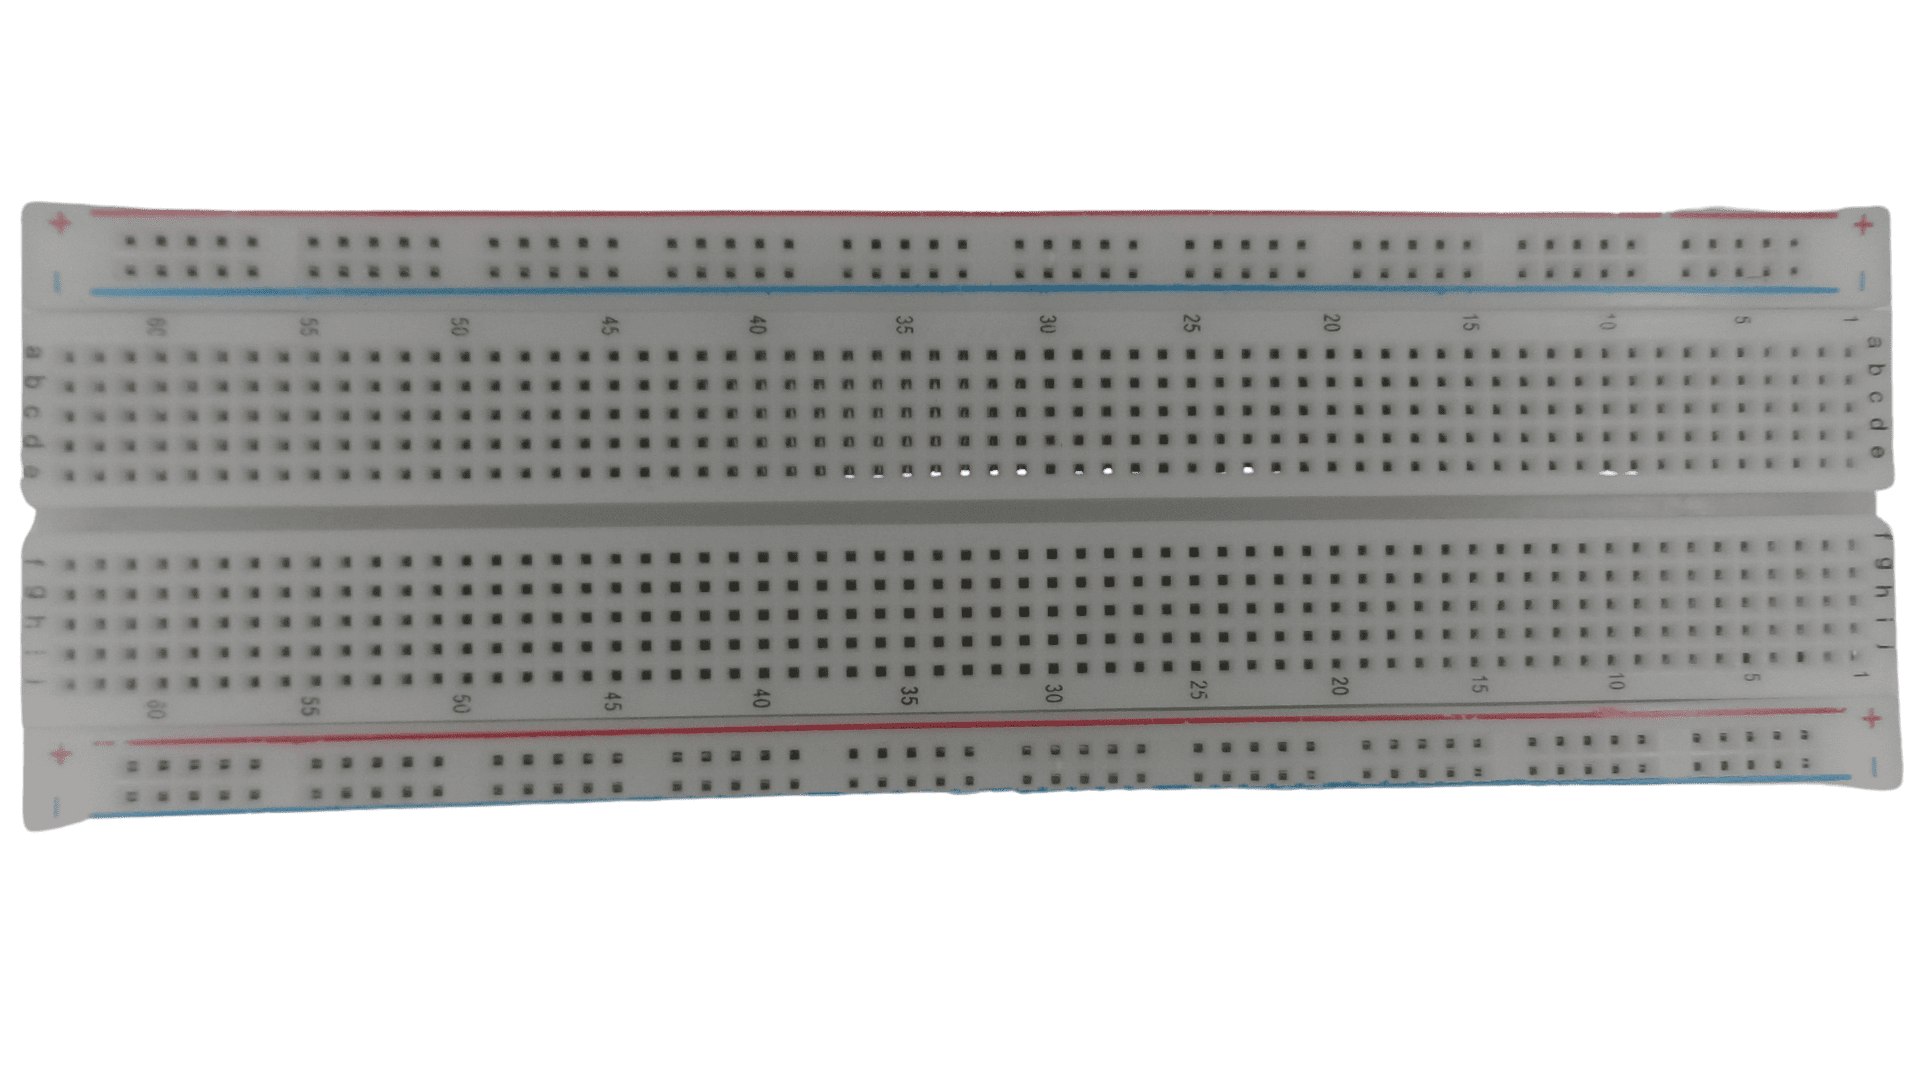  the user insert components with solderless breadboard